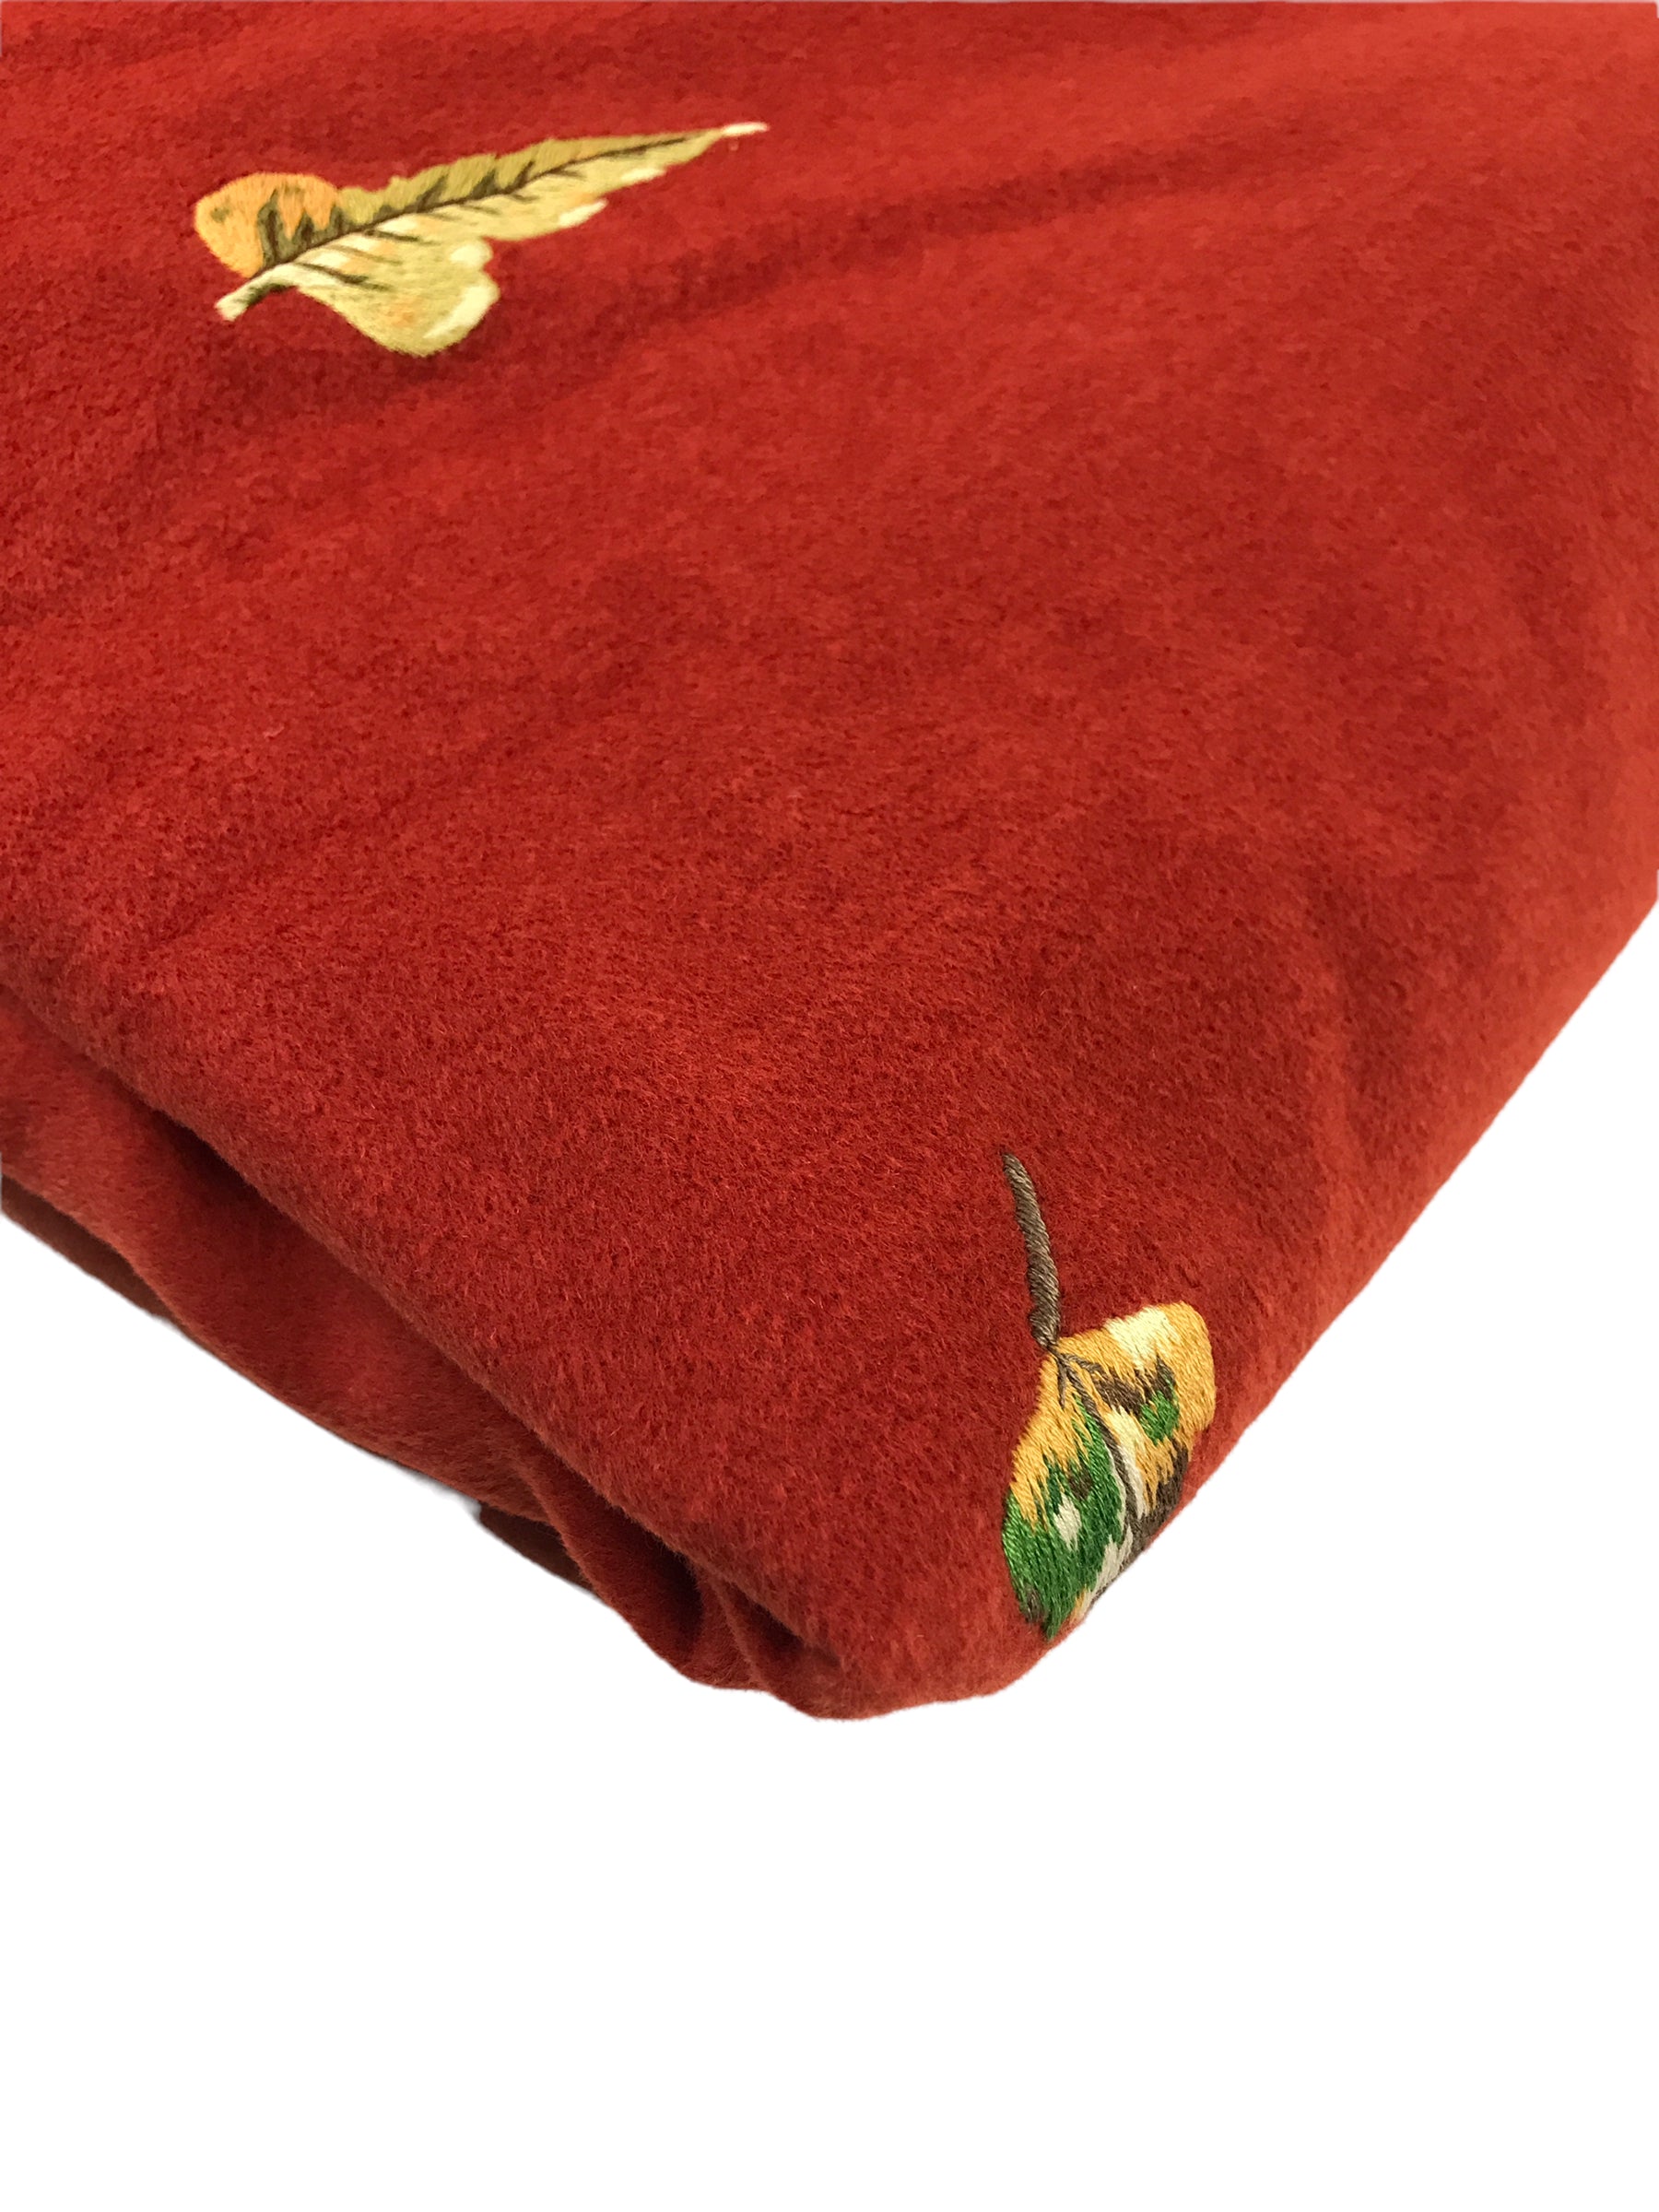 Vintage 80's-90's Exceptional Leaves Walk-In The Park Embroidered Plaid Wool/Cashmere Throw w/Suede Goatskin